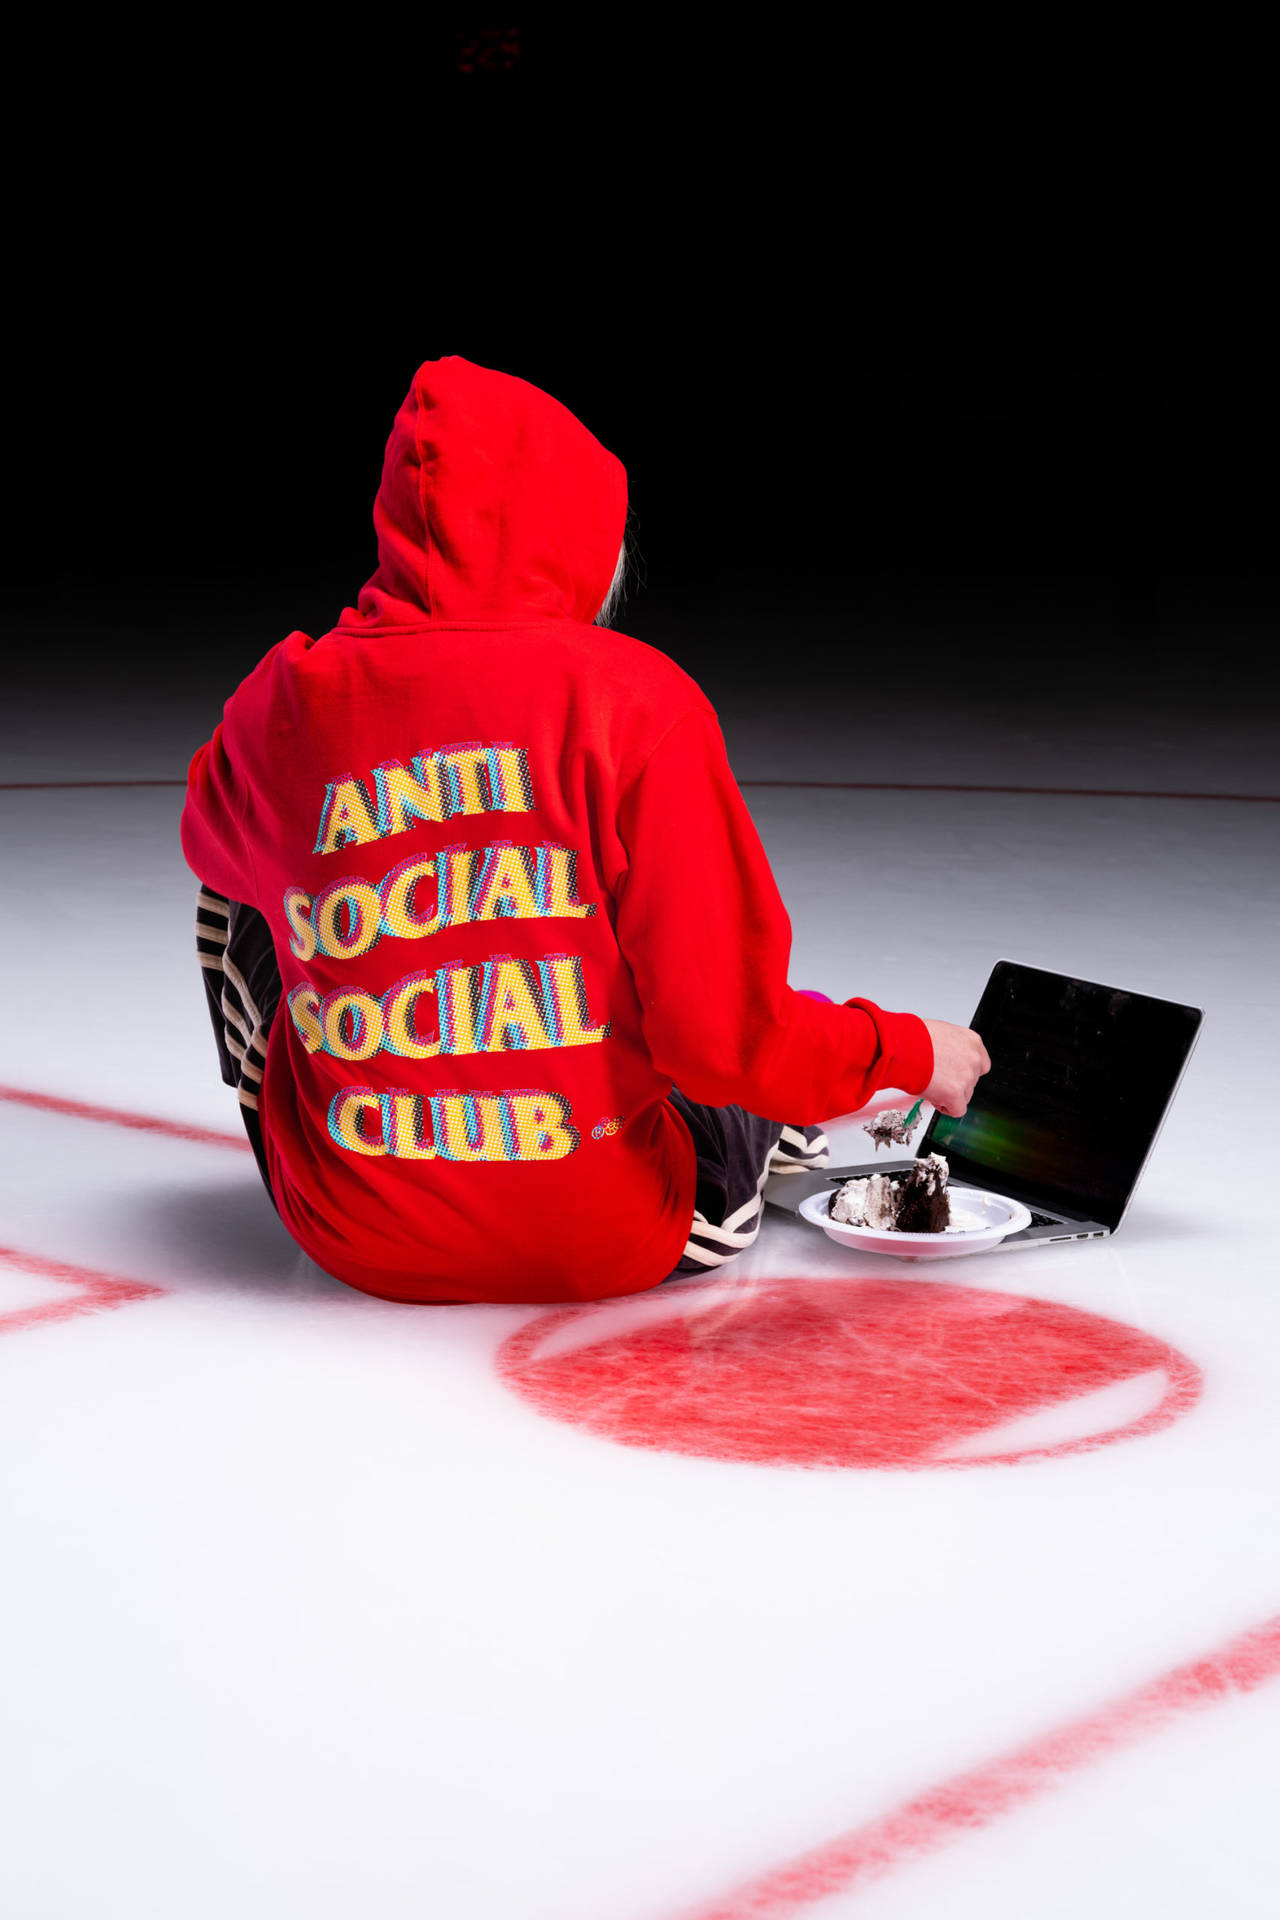 Anti Social Social Club Hoodie And Cake Background